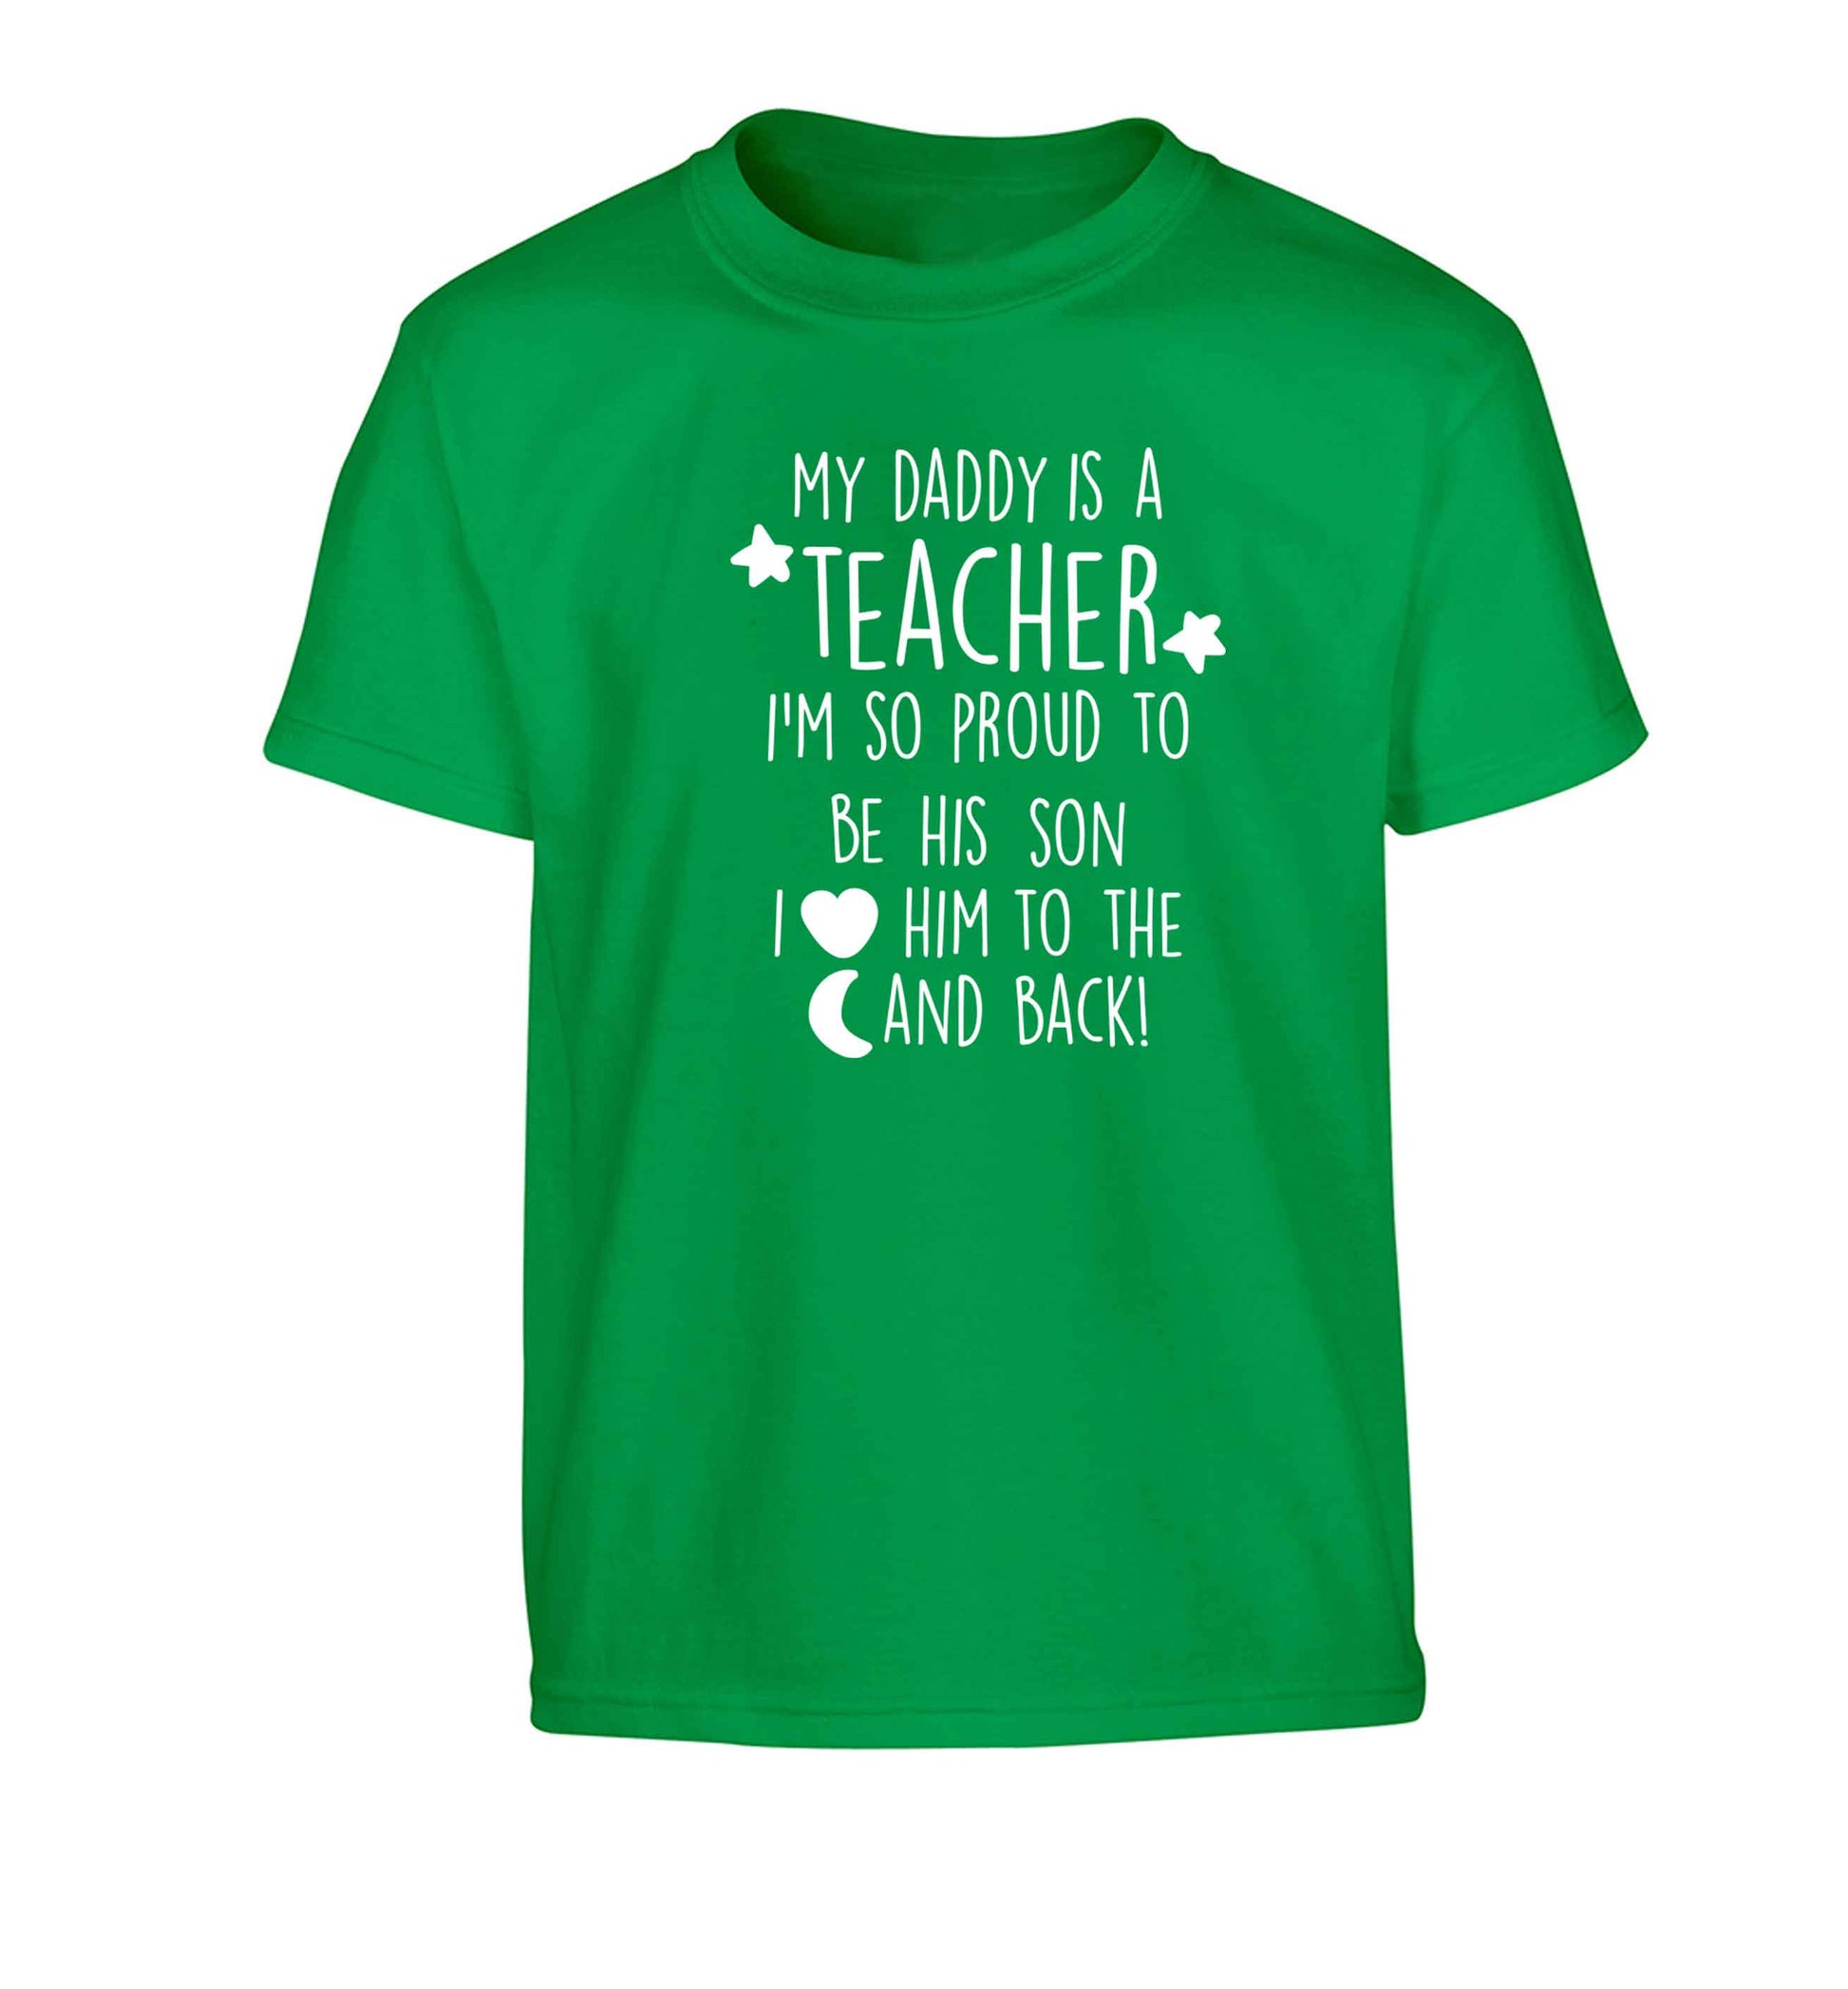 My daddy is a teacher I'm so proud to be his son I love her to the moon and back Children's green Tshirt 12-13 Years